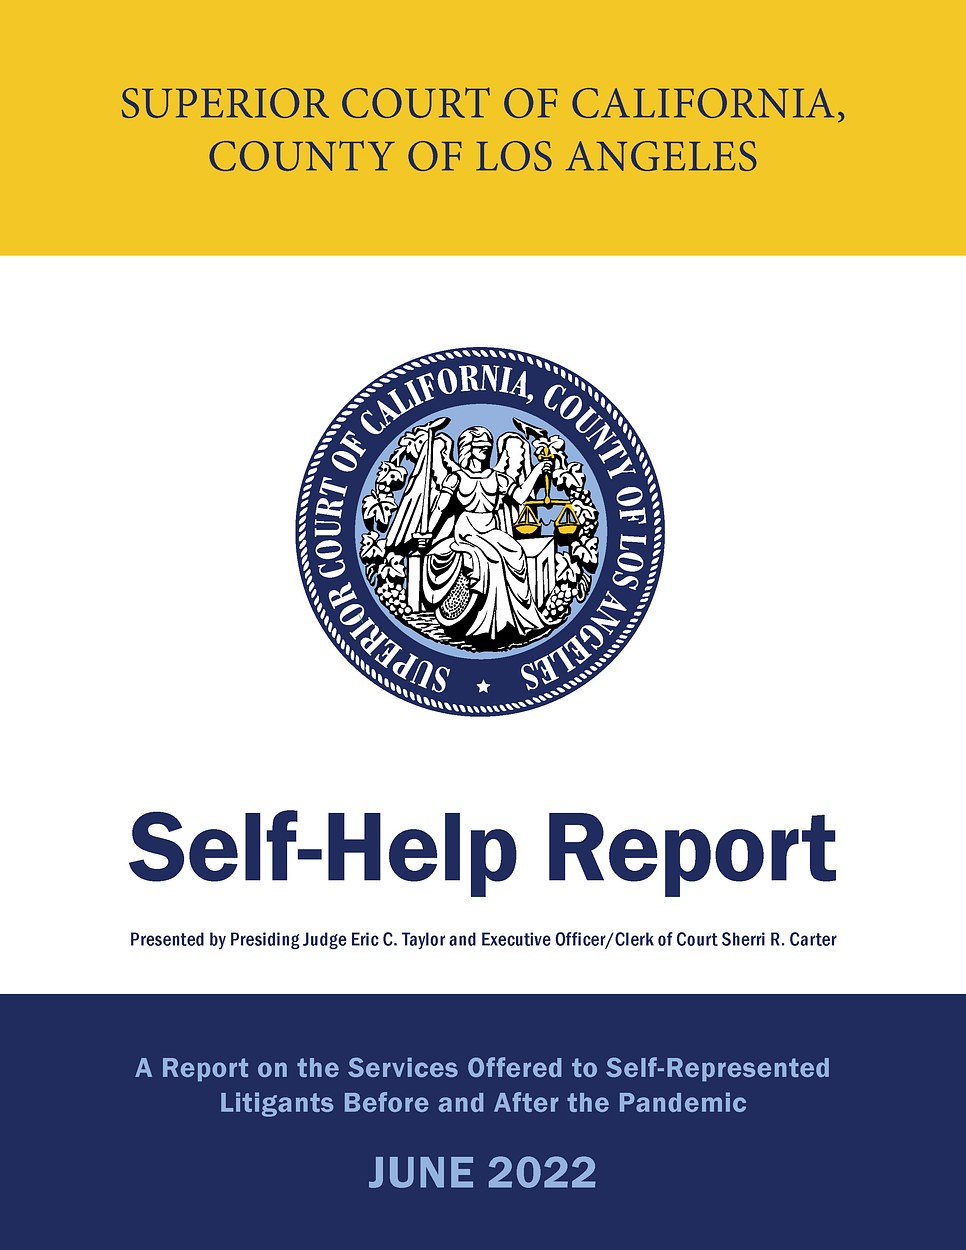 Self-Help Report - Superior Court of California, County of Los Angeles